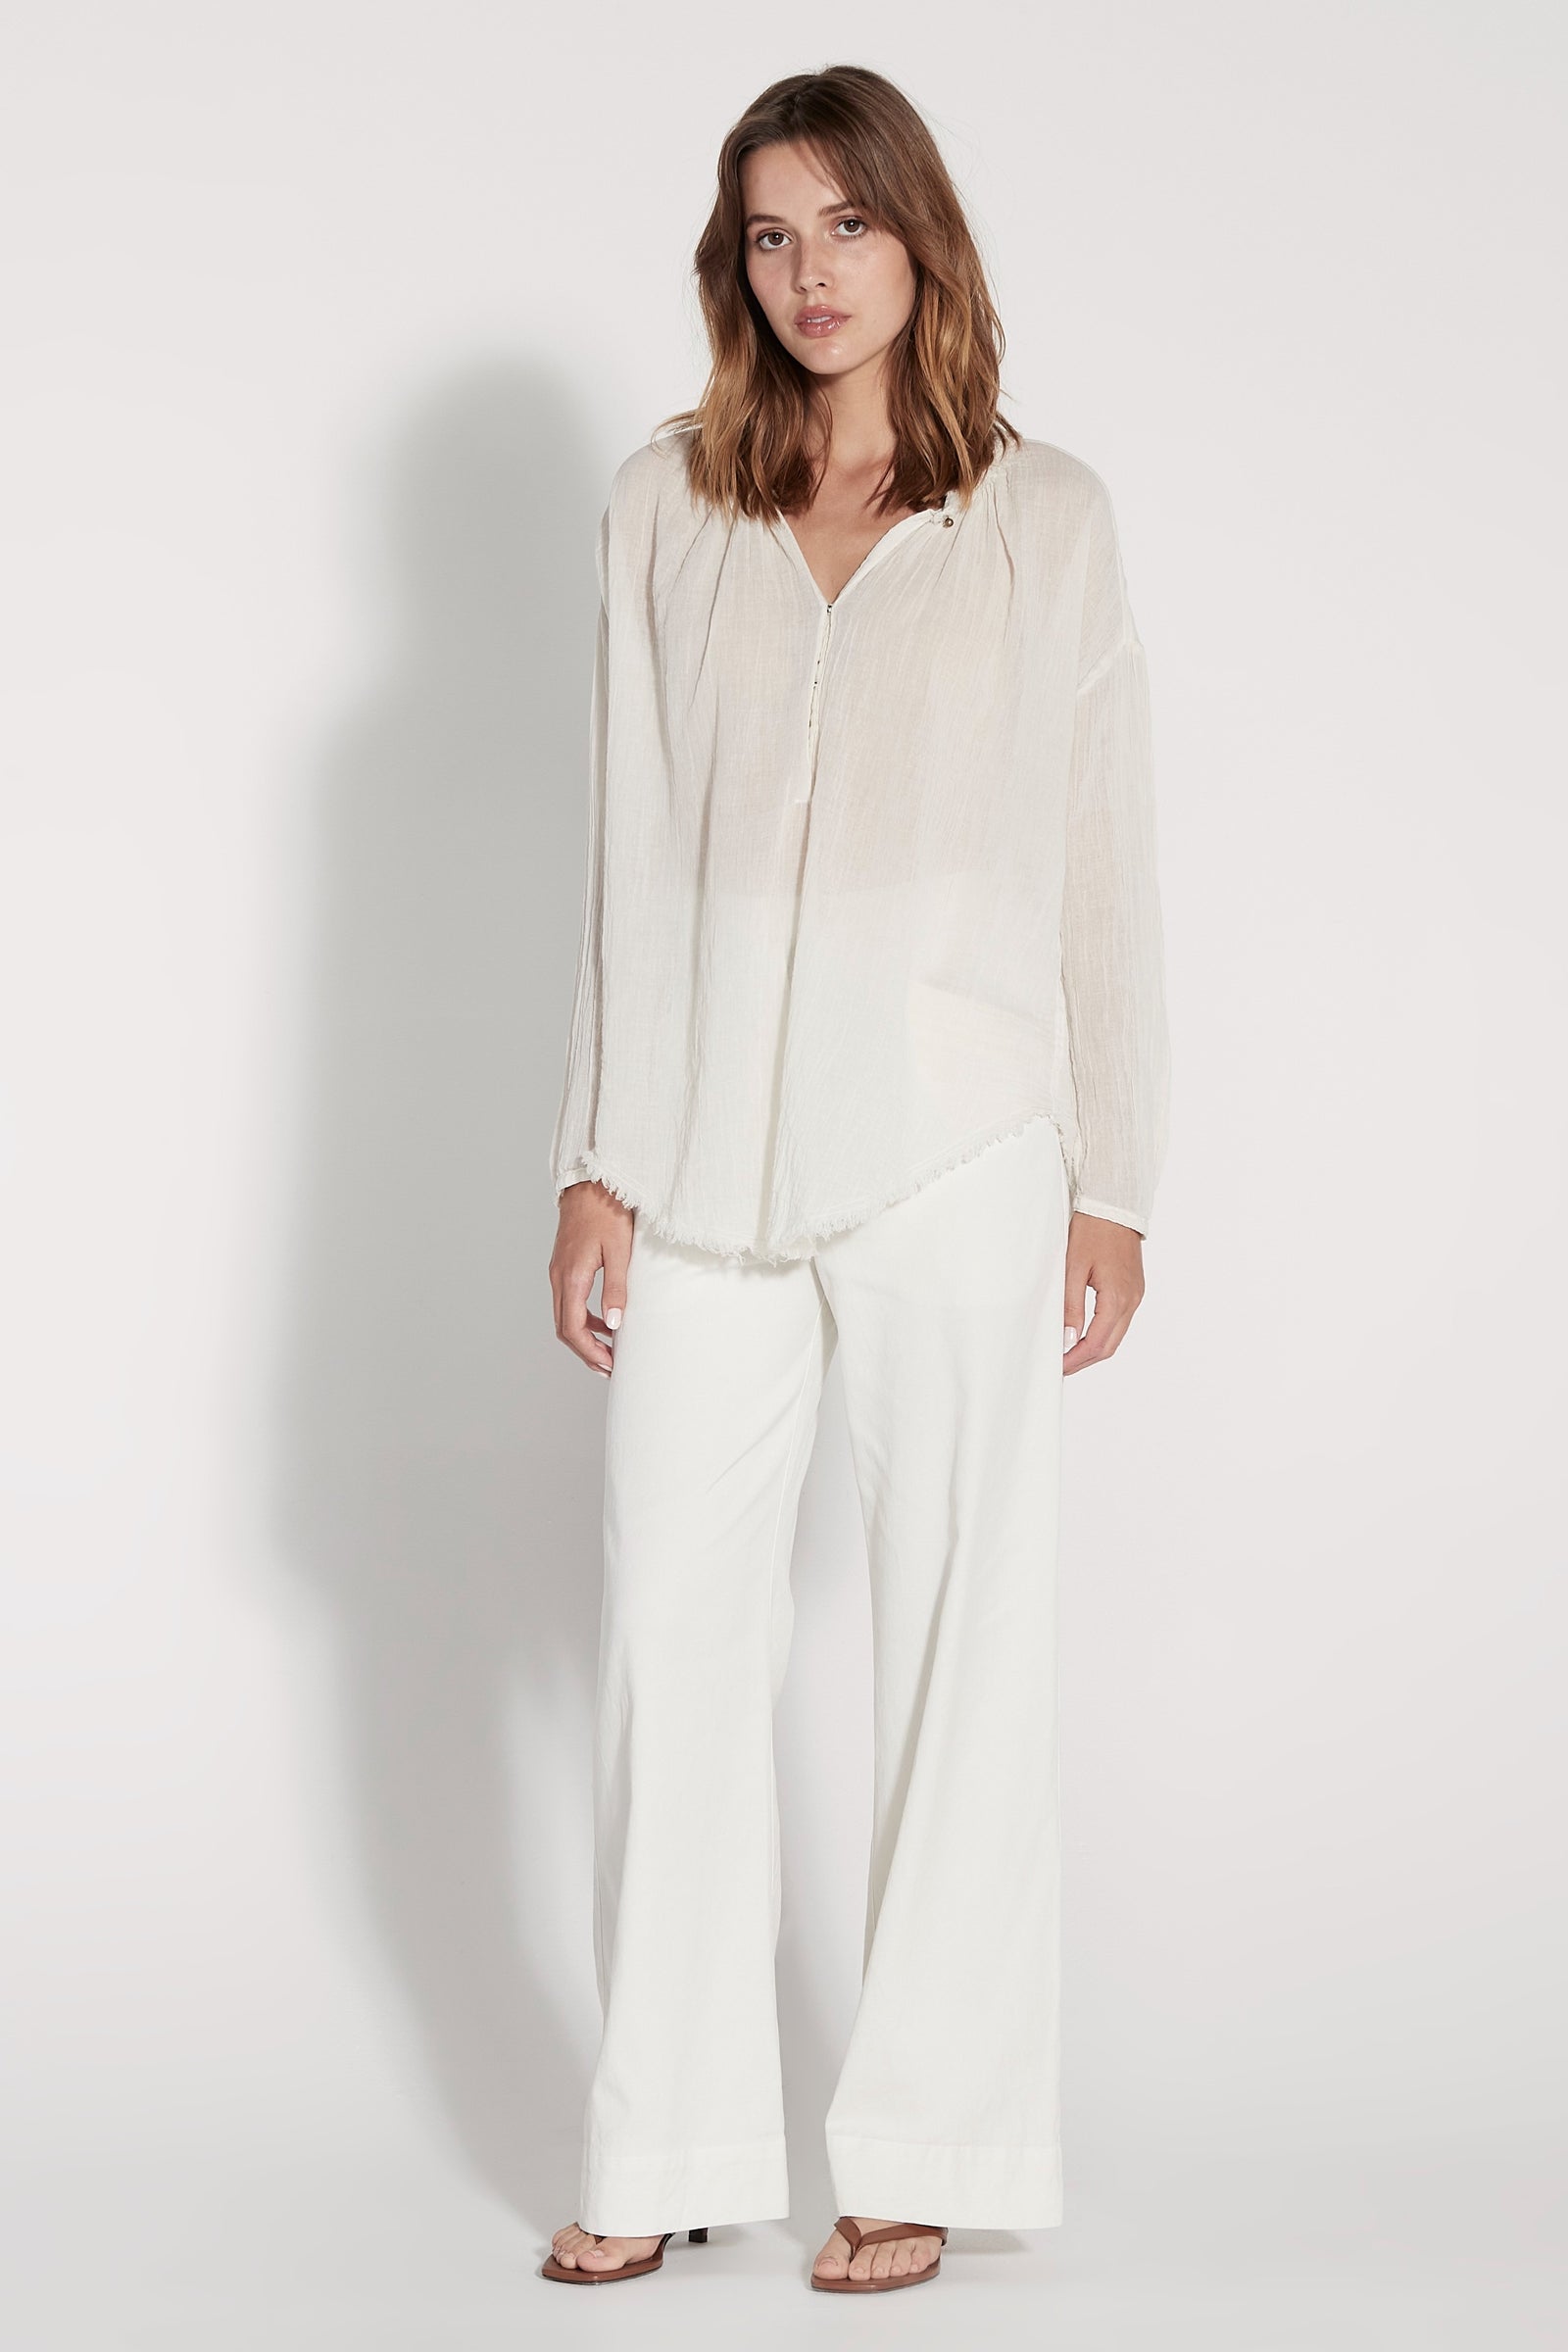 Washed White Lynn Pant RA-PANT ARCHIVE-SPRING2'23   